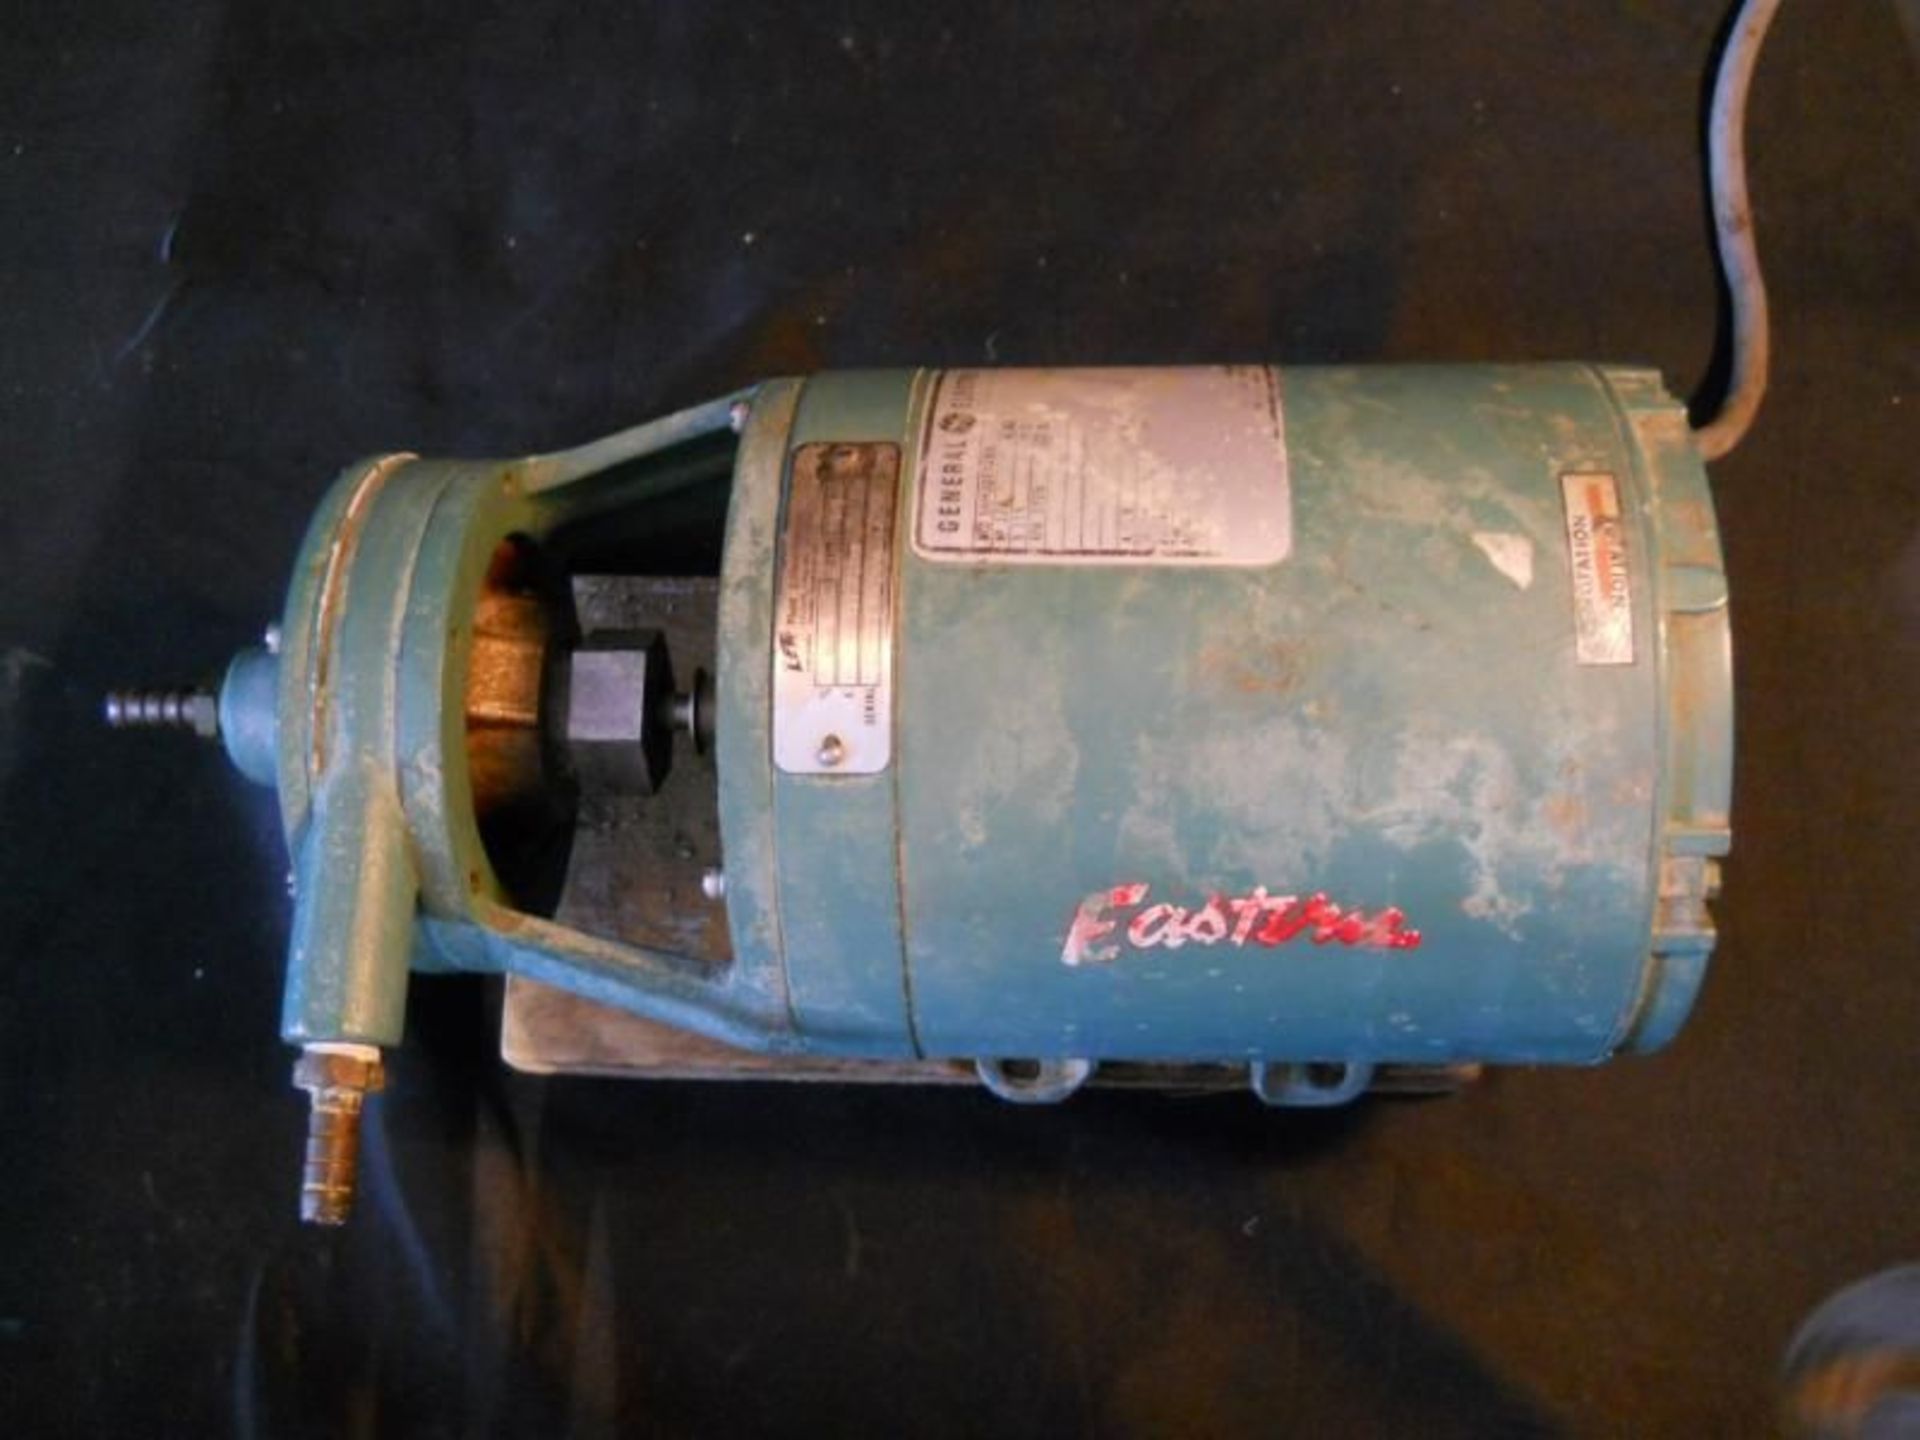 Eastern Pulsafeeder Pump Model D-6 (D6) w/ GE 1/8 HP Motor (1725 RPM), Qty 1, 321201000827 - Image 2 of 8